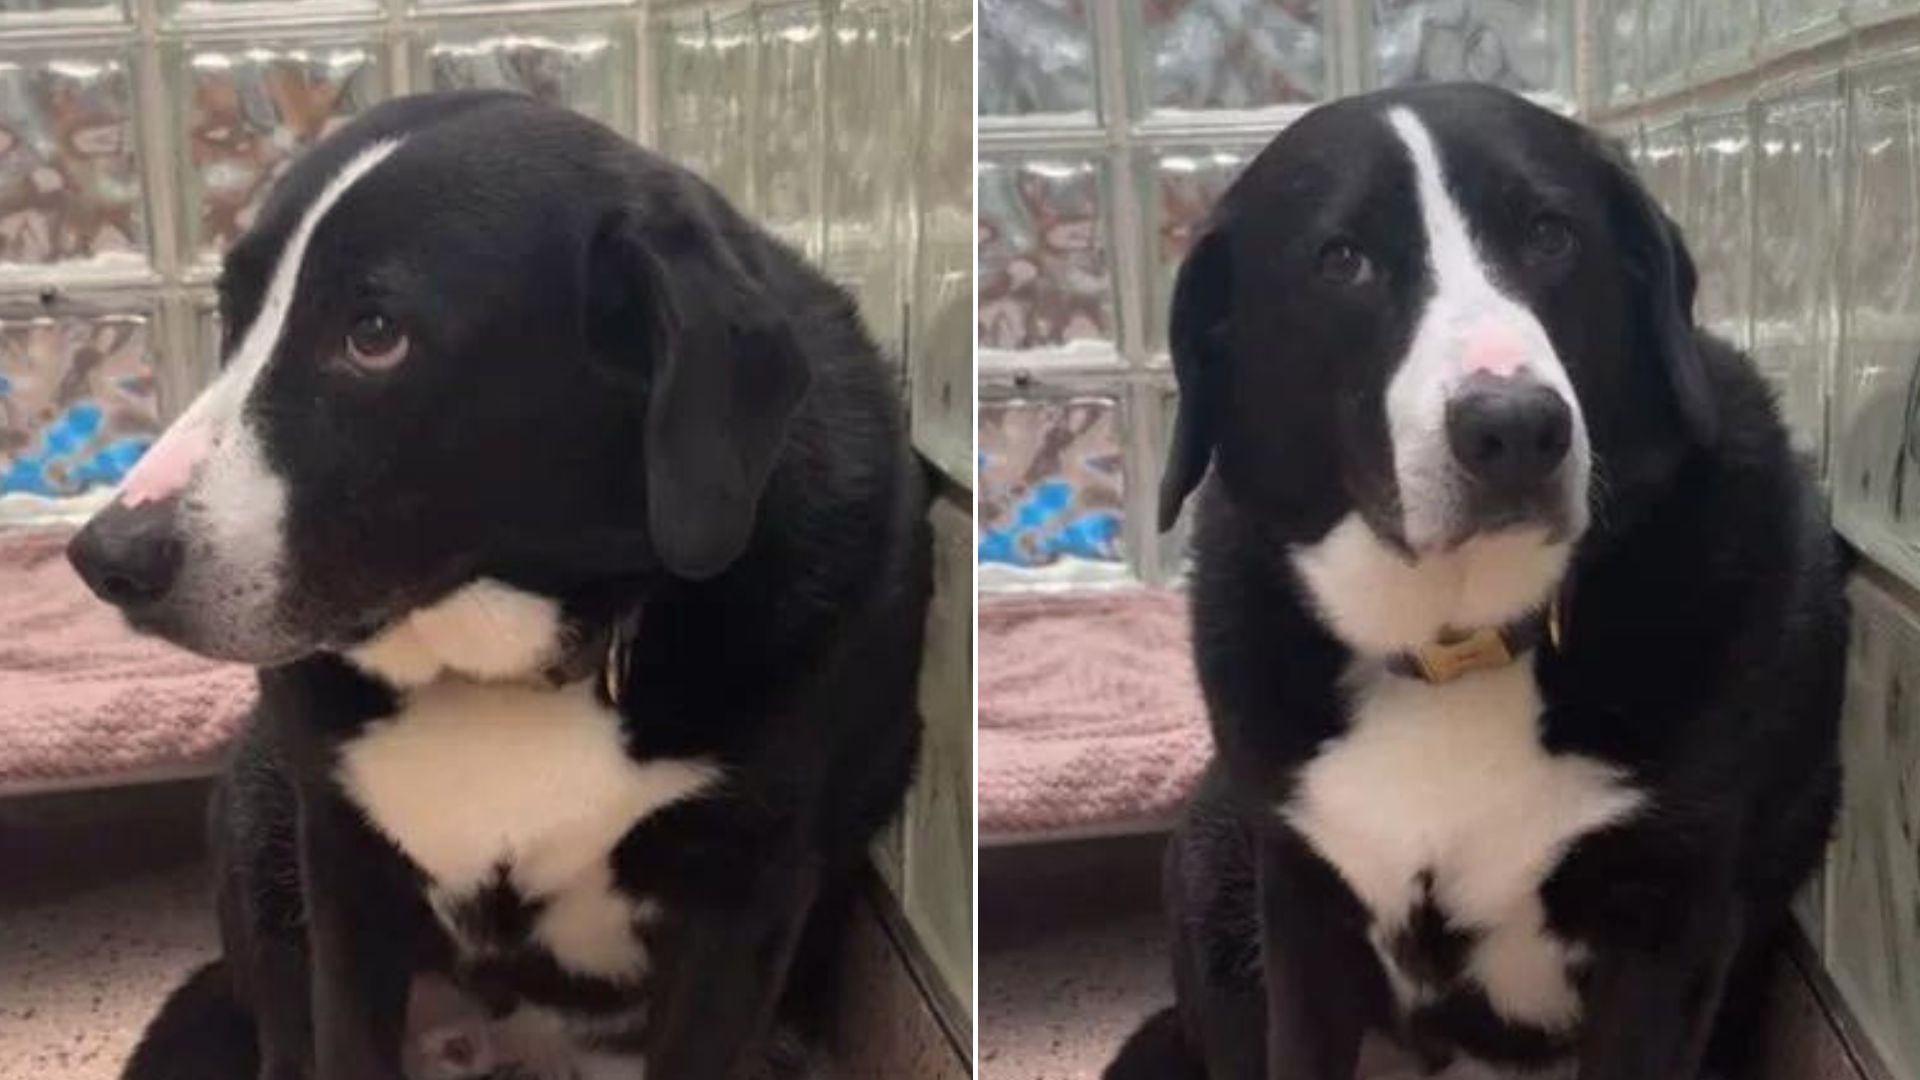 The Sad Dog Couldn’t Understand Why His “Only Family” Abandoned Him After 8 Years